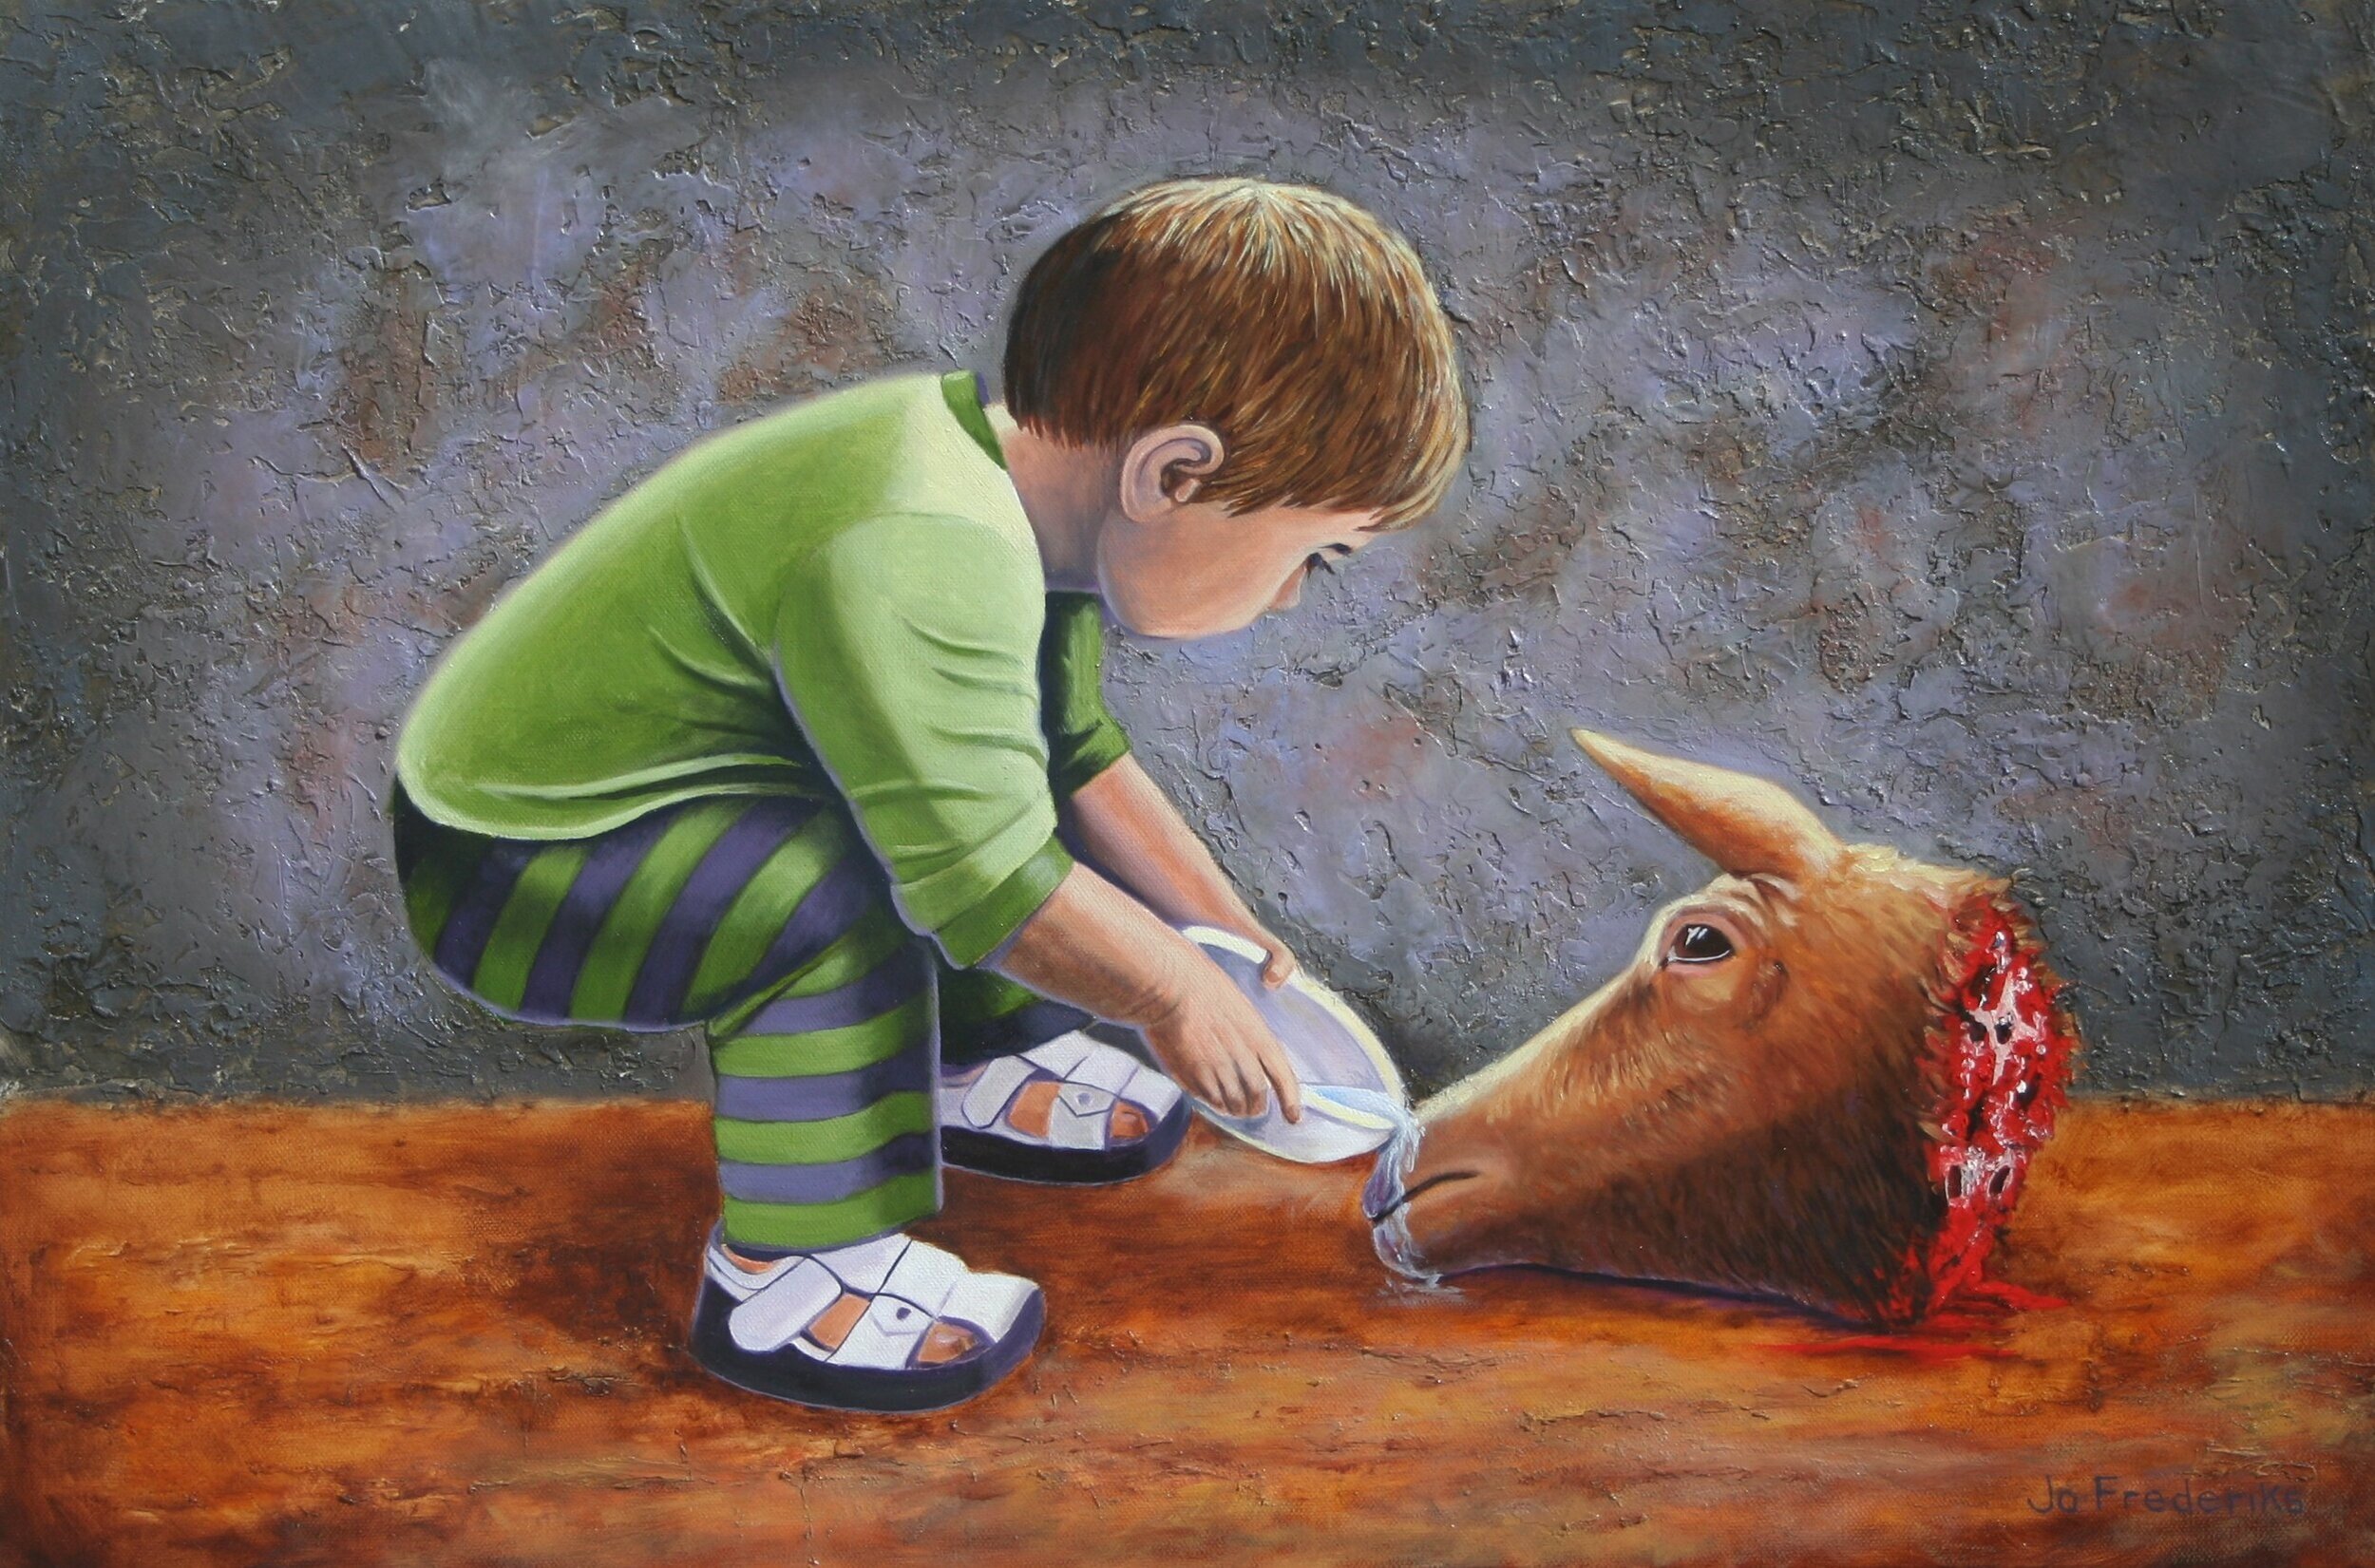 Animal Rights Paintings - Jo Frederiks